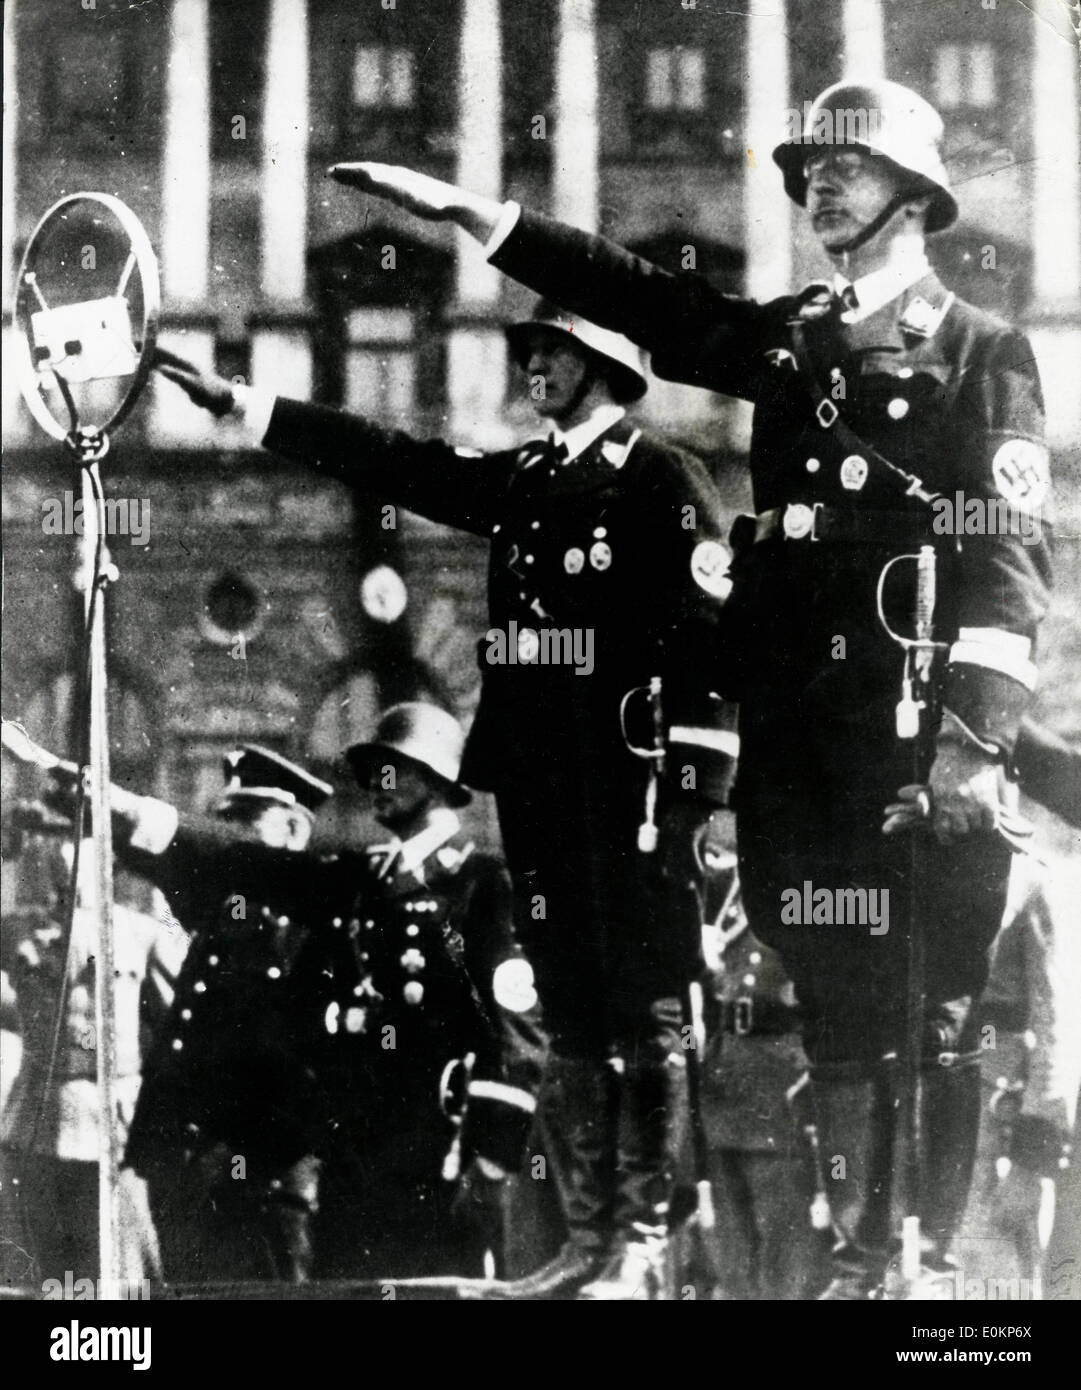 Heinrich Himmler takes the salute at a march part of Storm Troopers Stock Photo